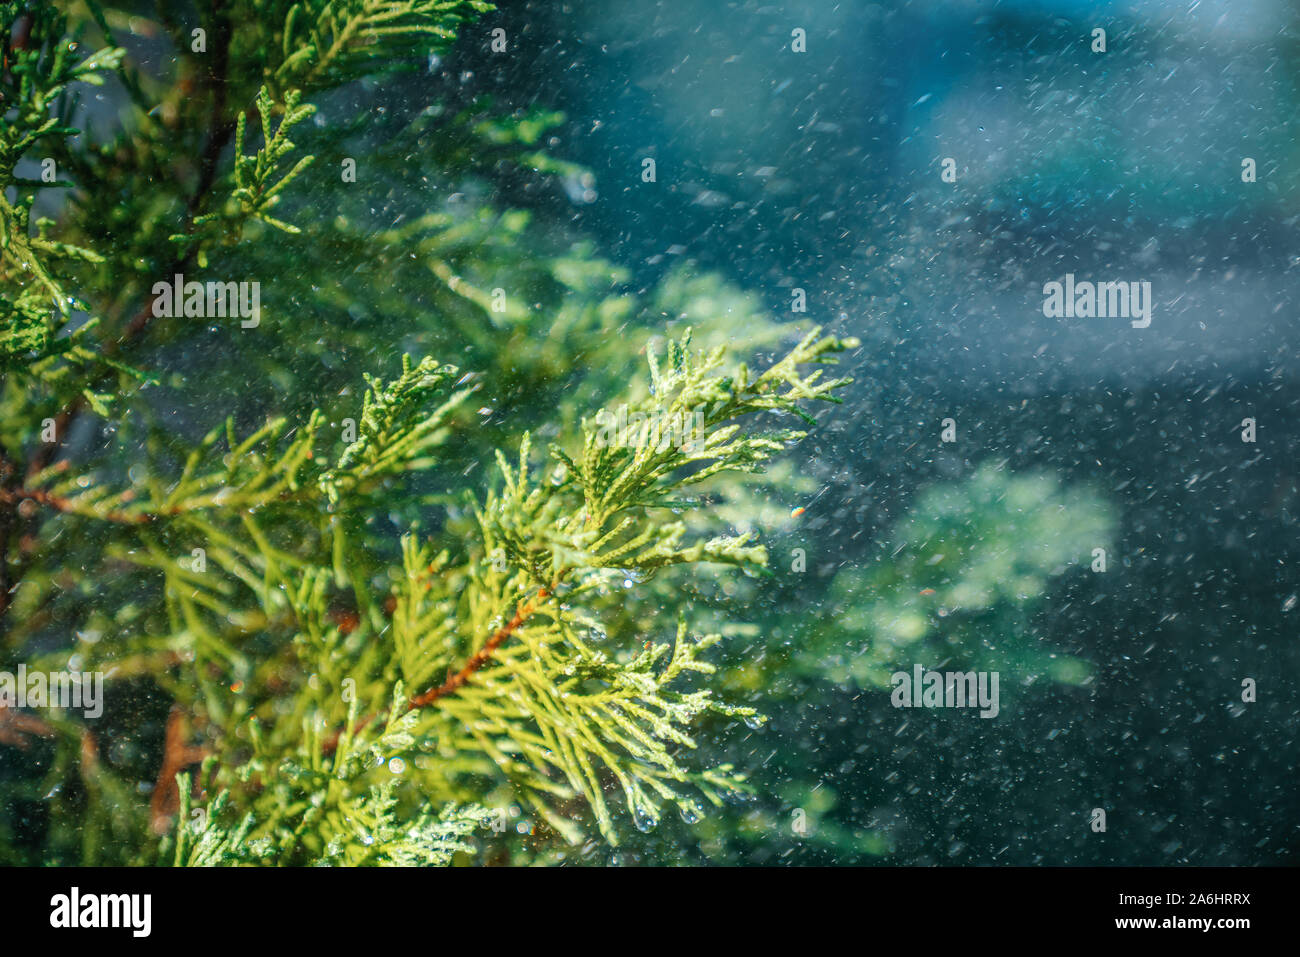 Raindrops are hanging on tree branch in the beautiful forest. Stock Photo